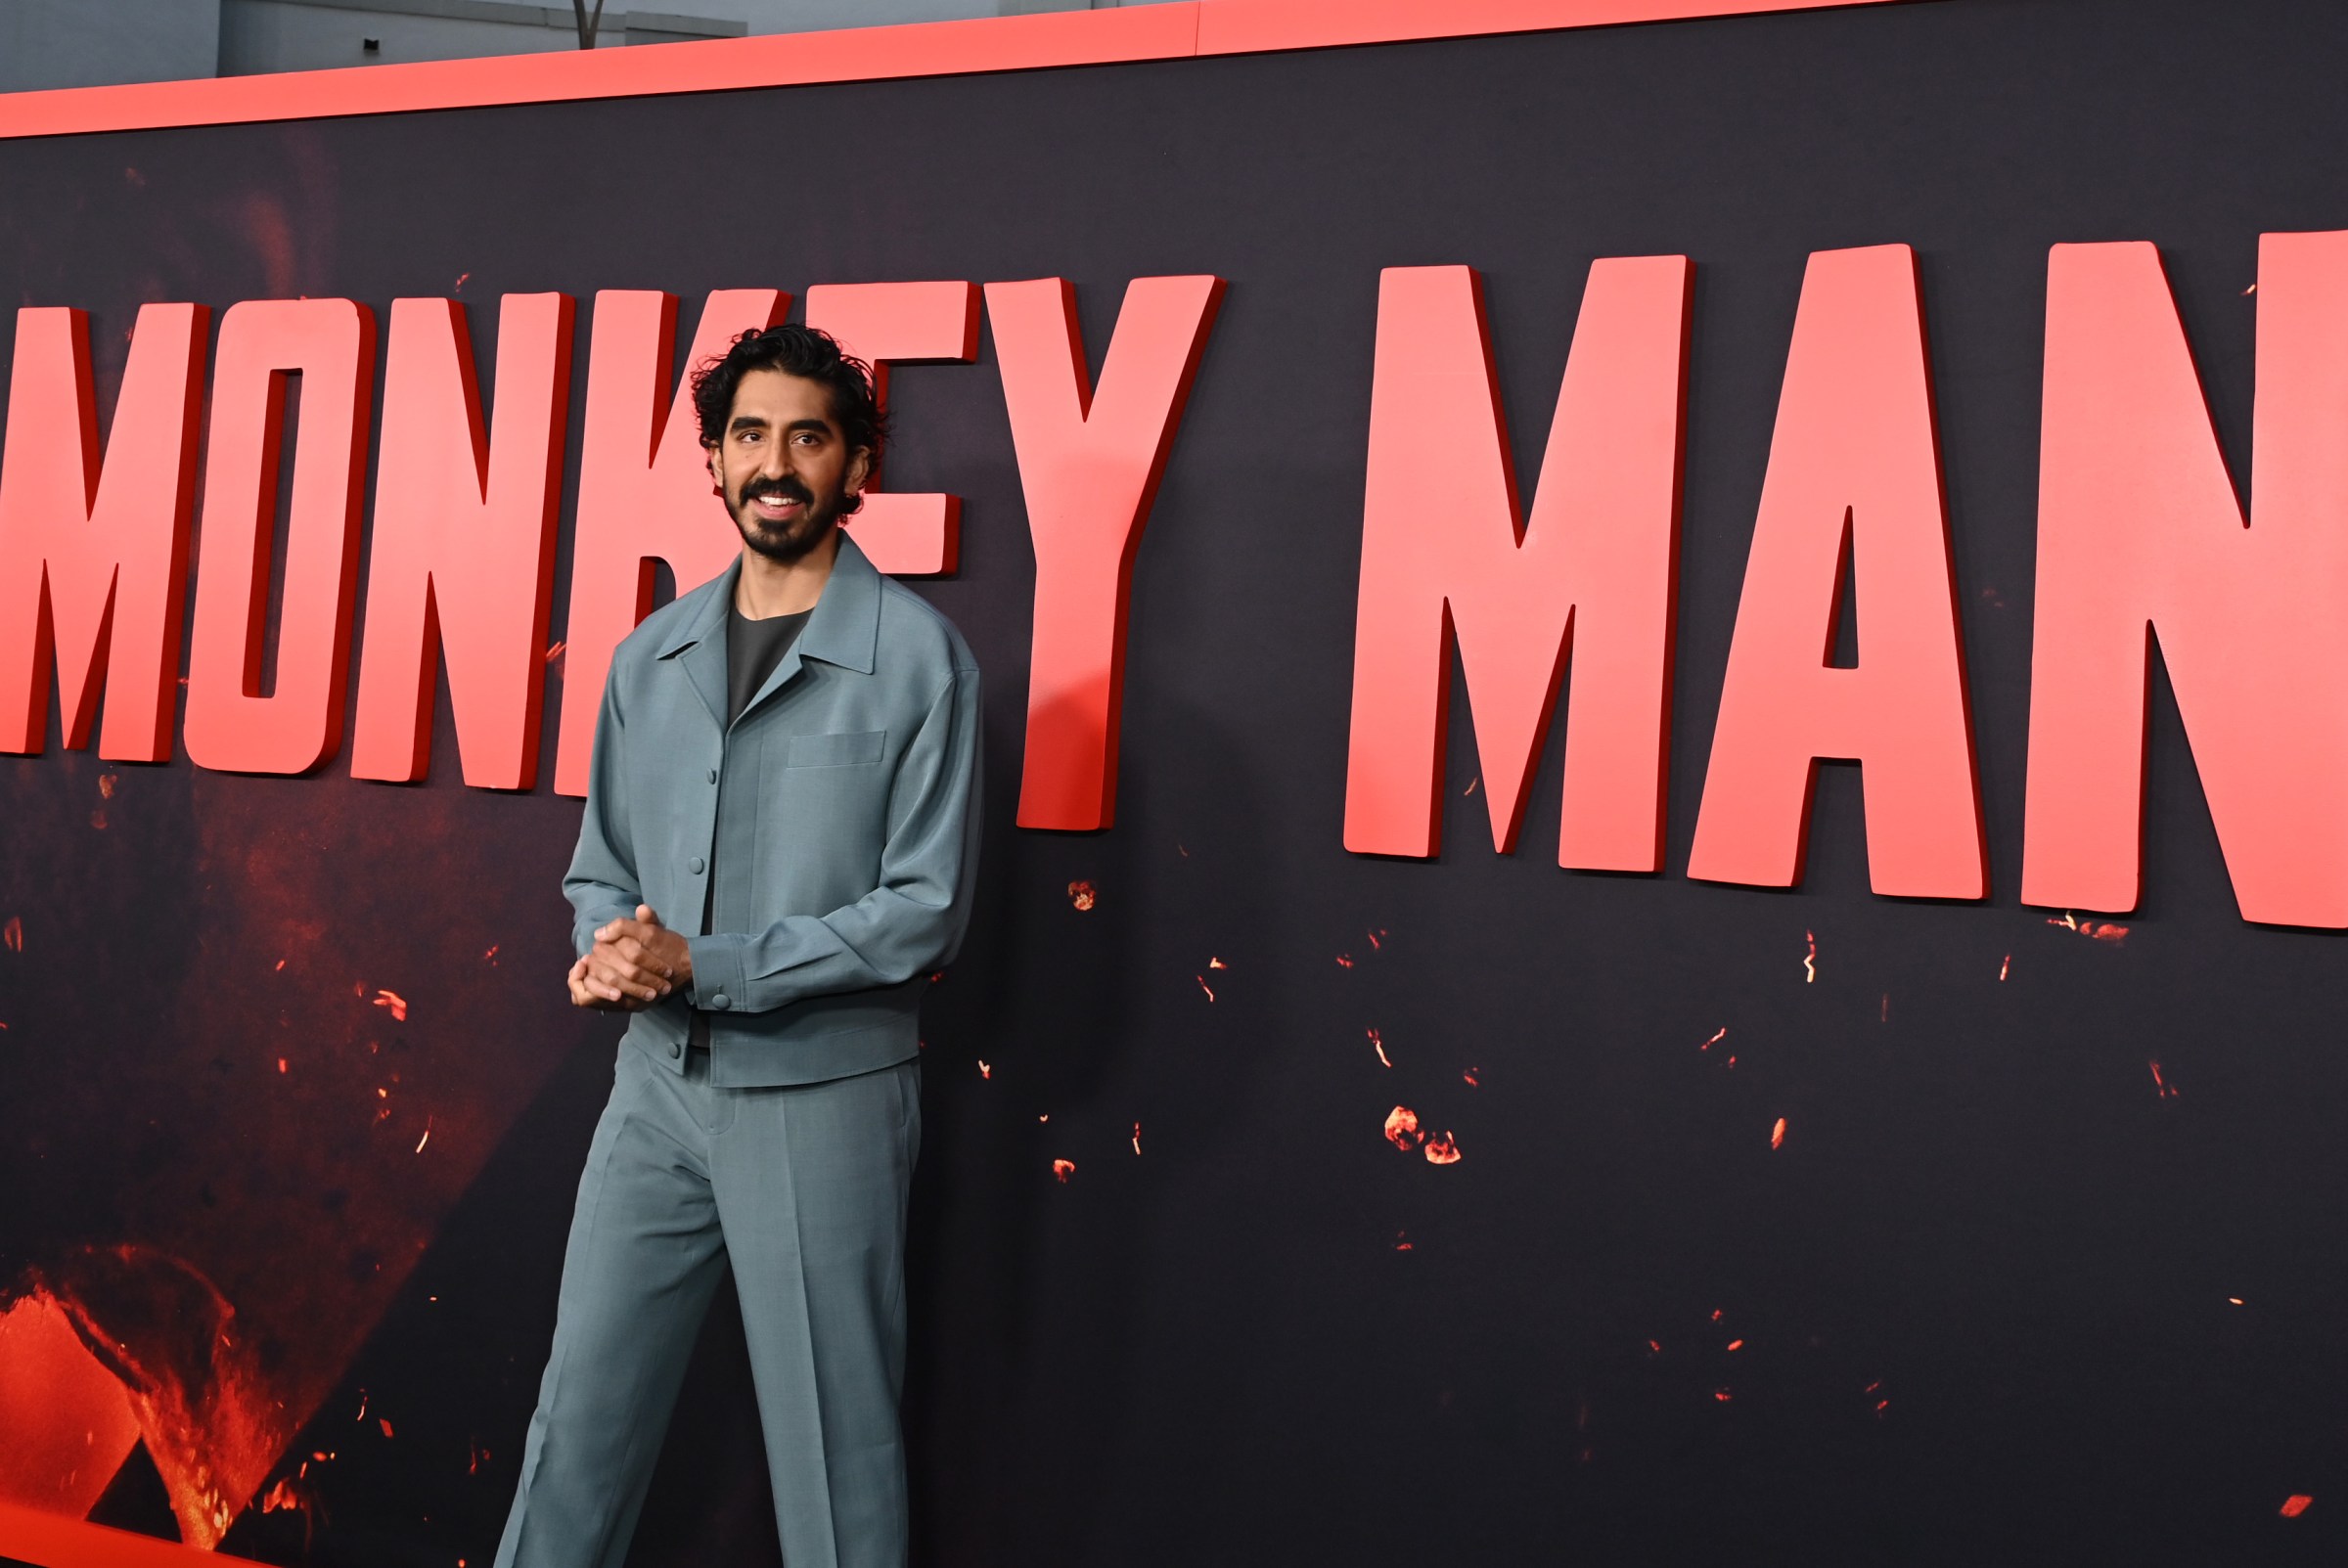 Dev Patel stands on a red carpet in front of the Monkey Man logo.